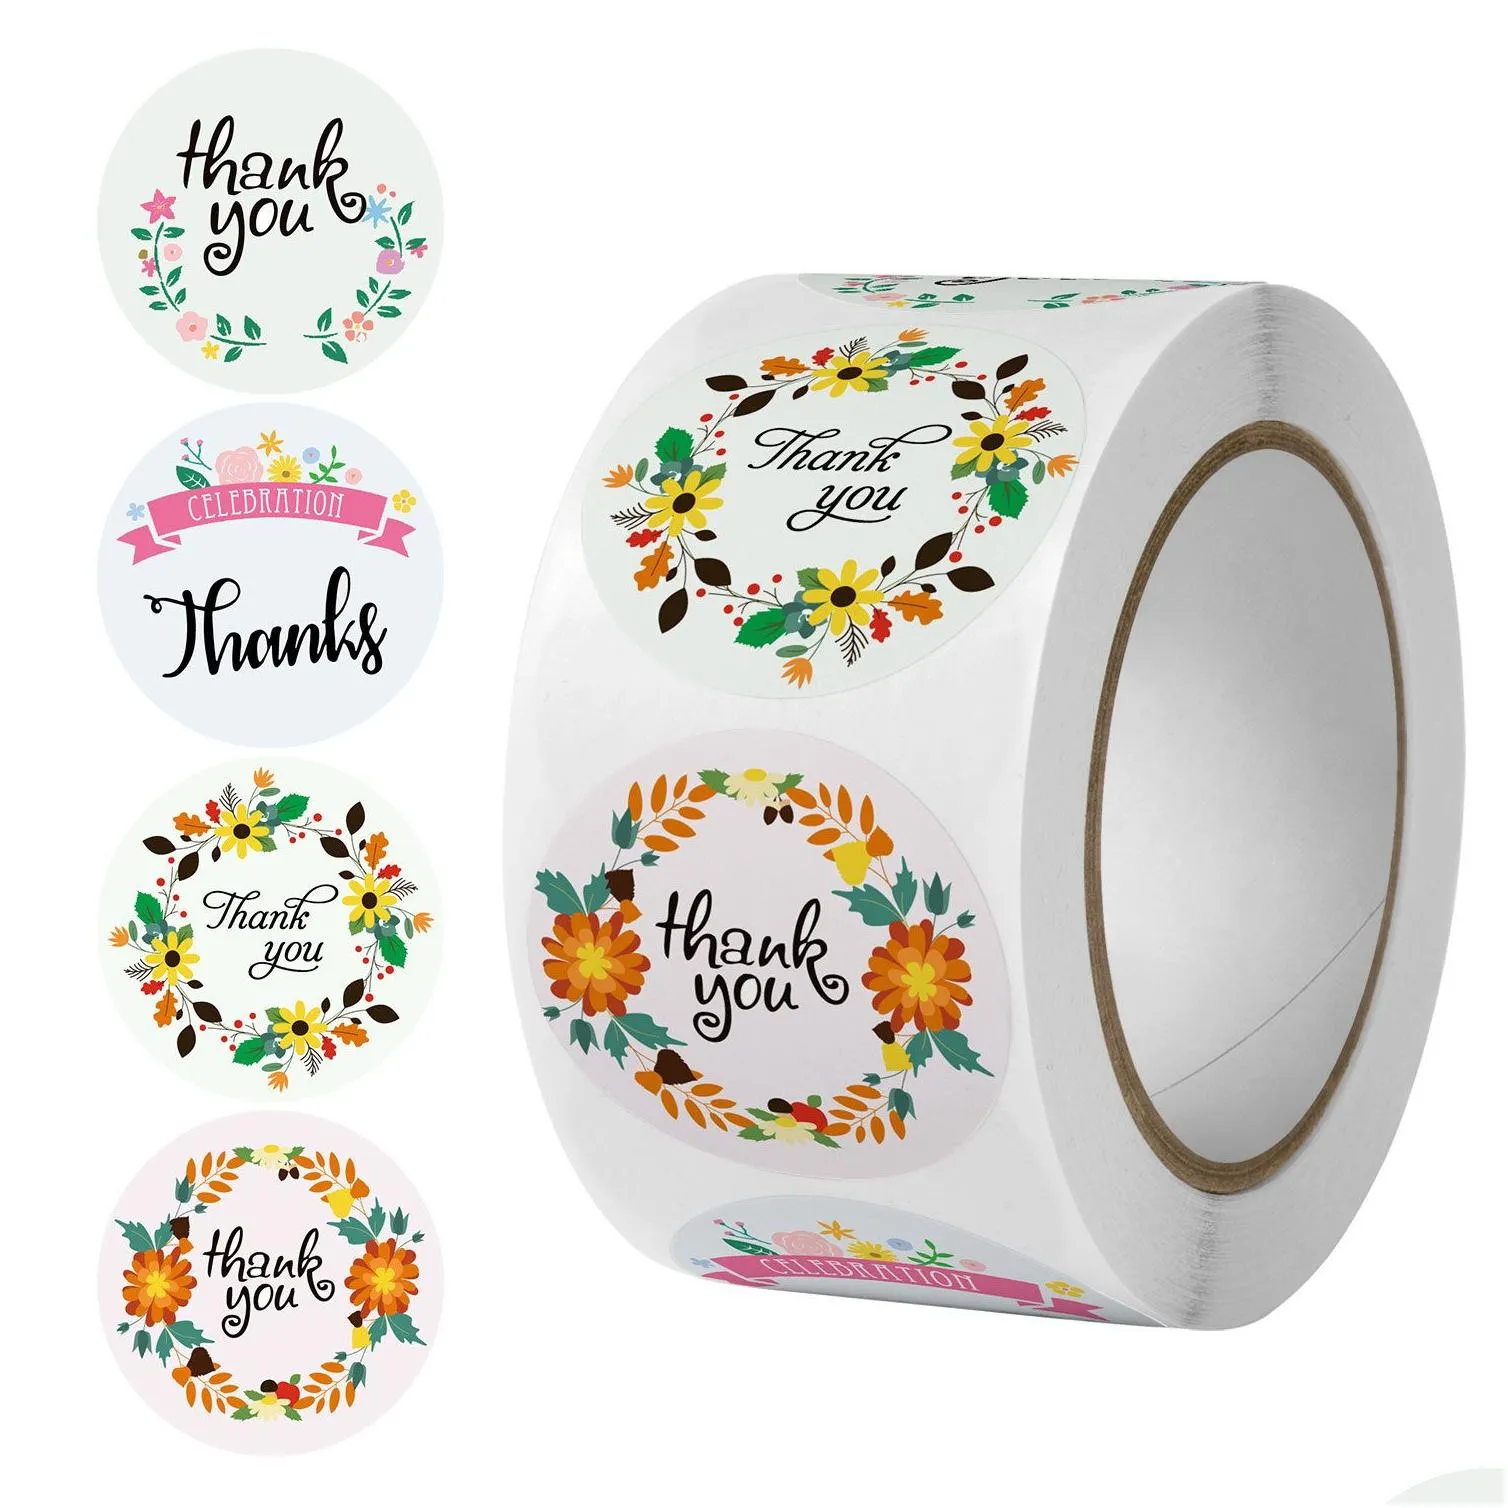 Adhesive Stickers Wholesale Florals Sticker Labels Flower Pattern Shop Small Shop Business Stickers 1Inch 500 Pcs Per Roll Pieces Offi Dh7Ay